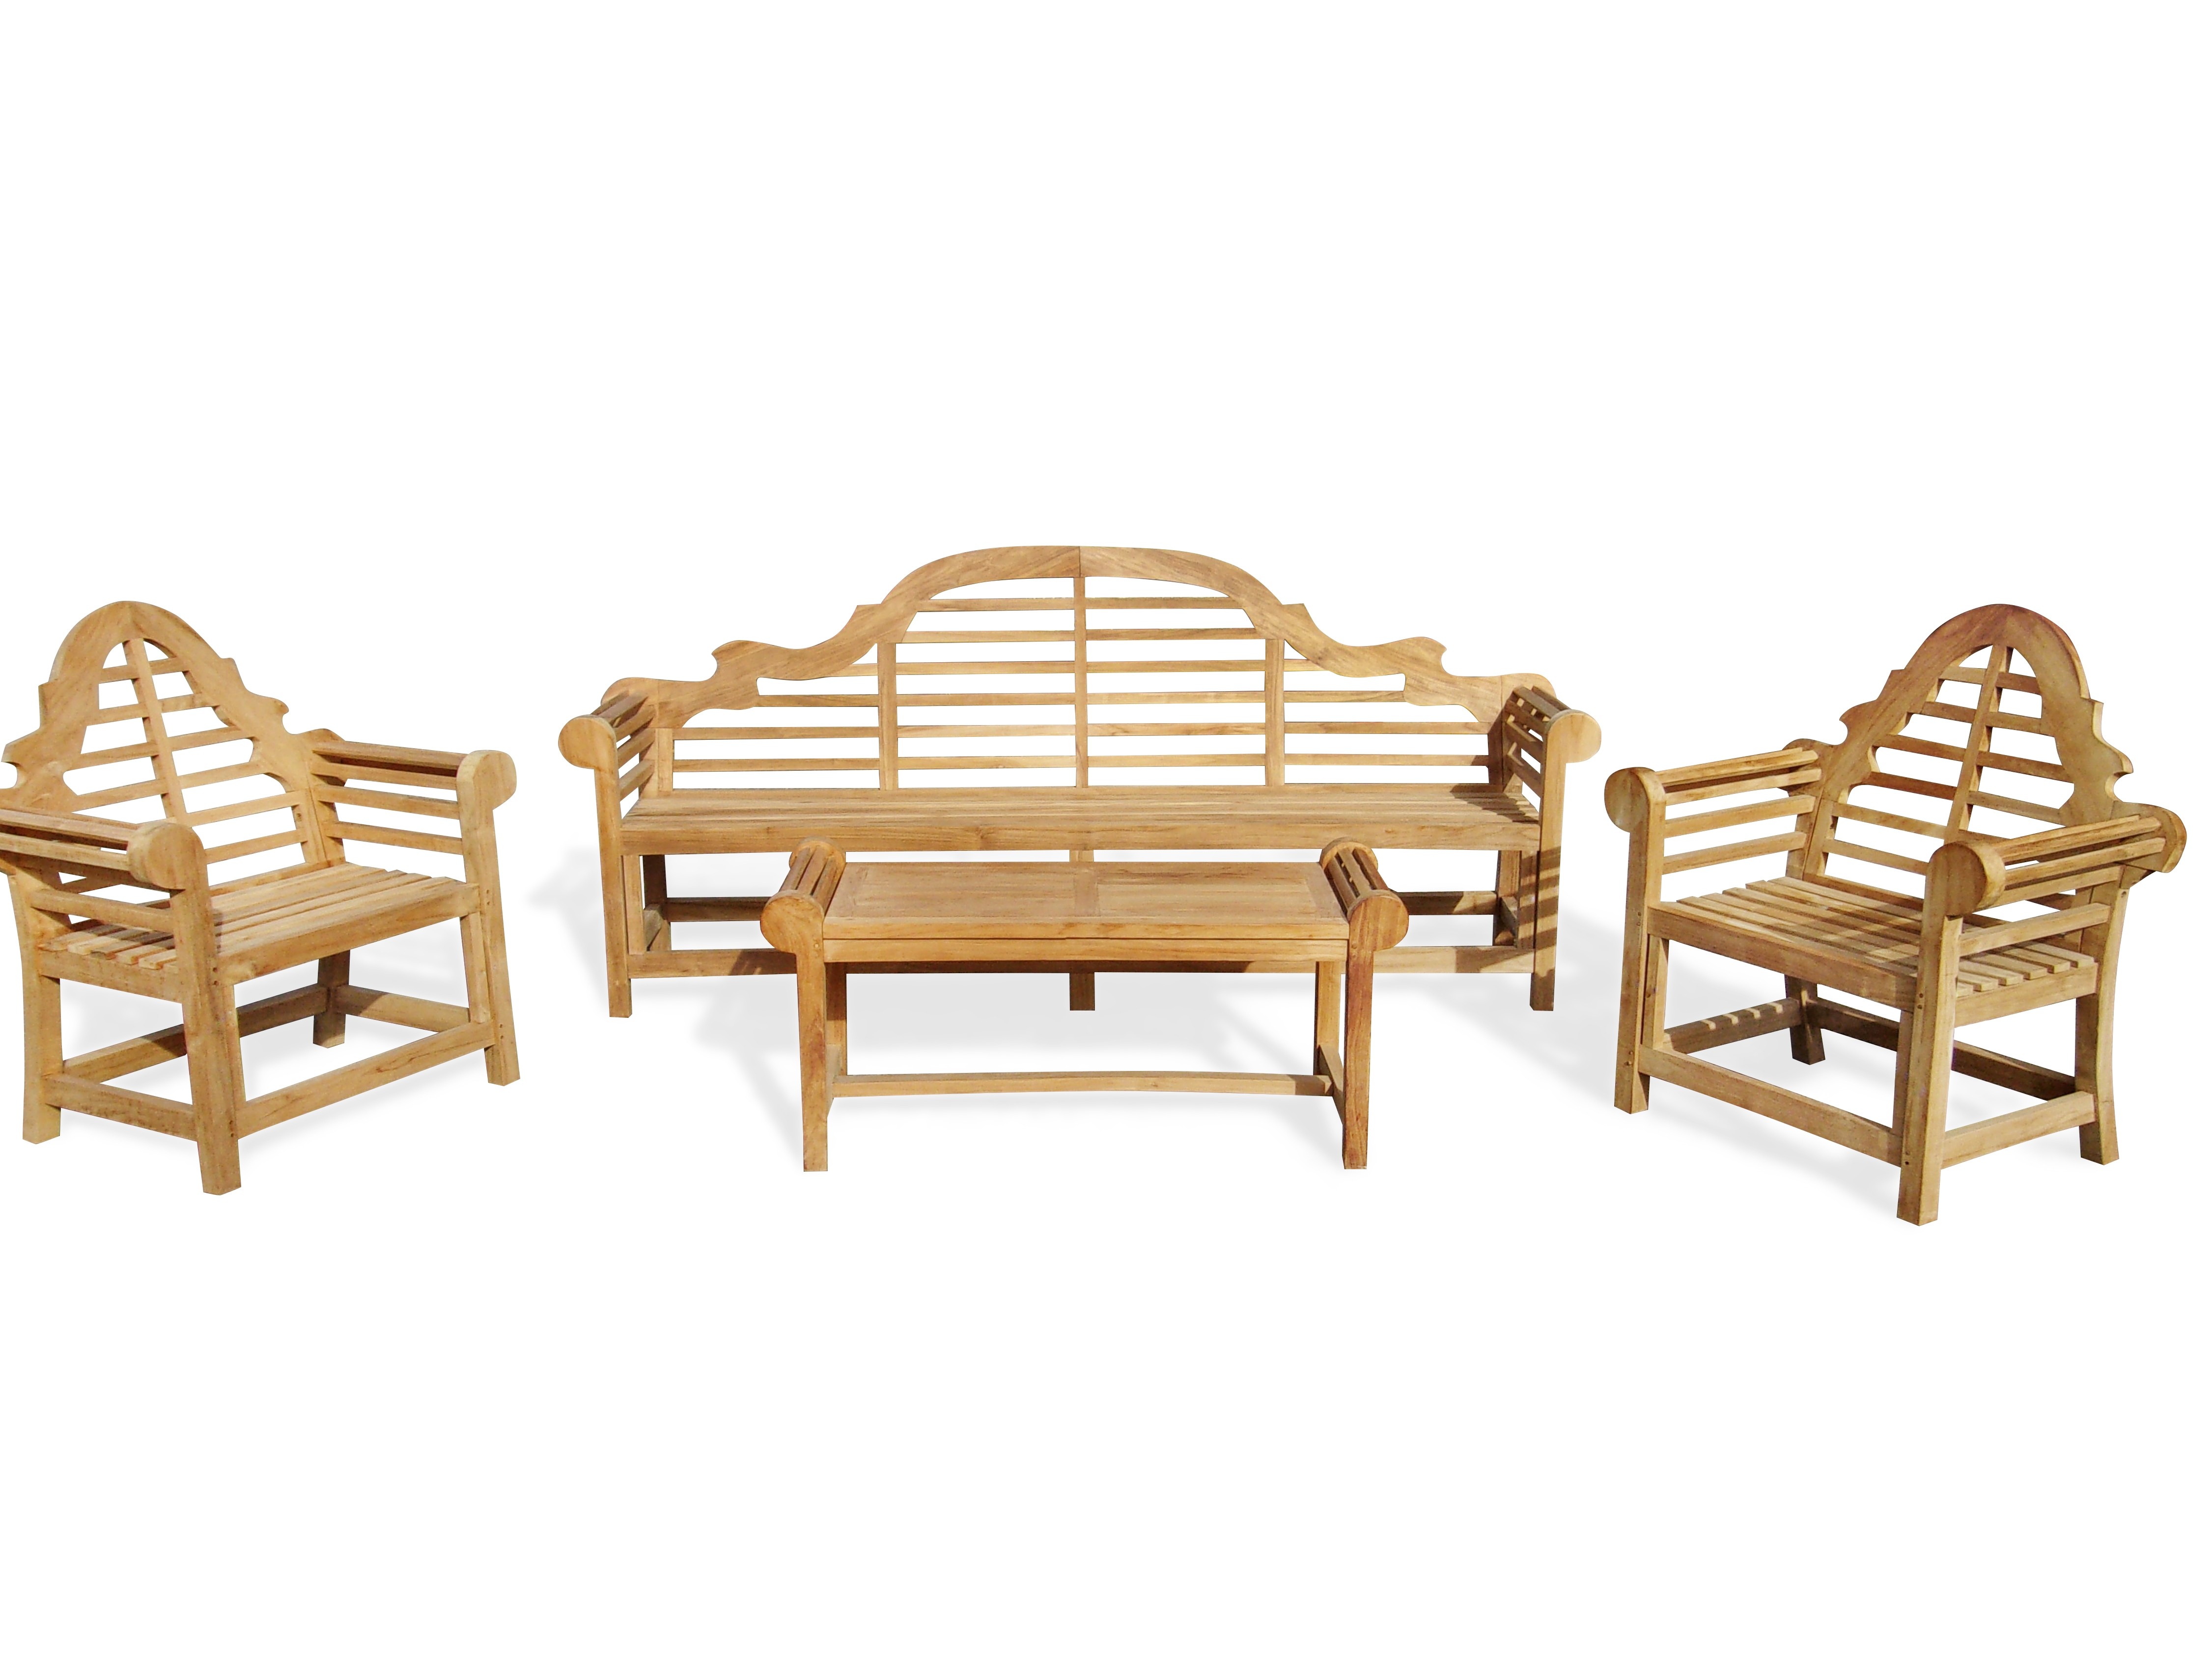 The Iconic 8 Foot (96 Inches) Grade A Teak Lutyens Bench (The Original Scale) w 2 Lutyens Chairs and Lutyens Coffee Table